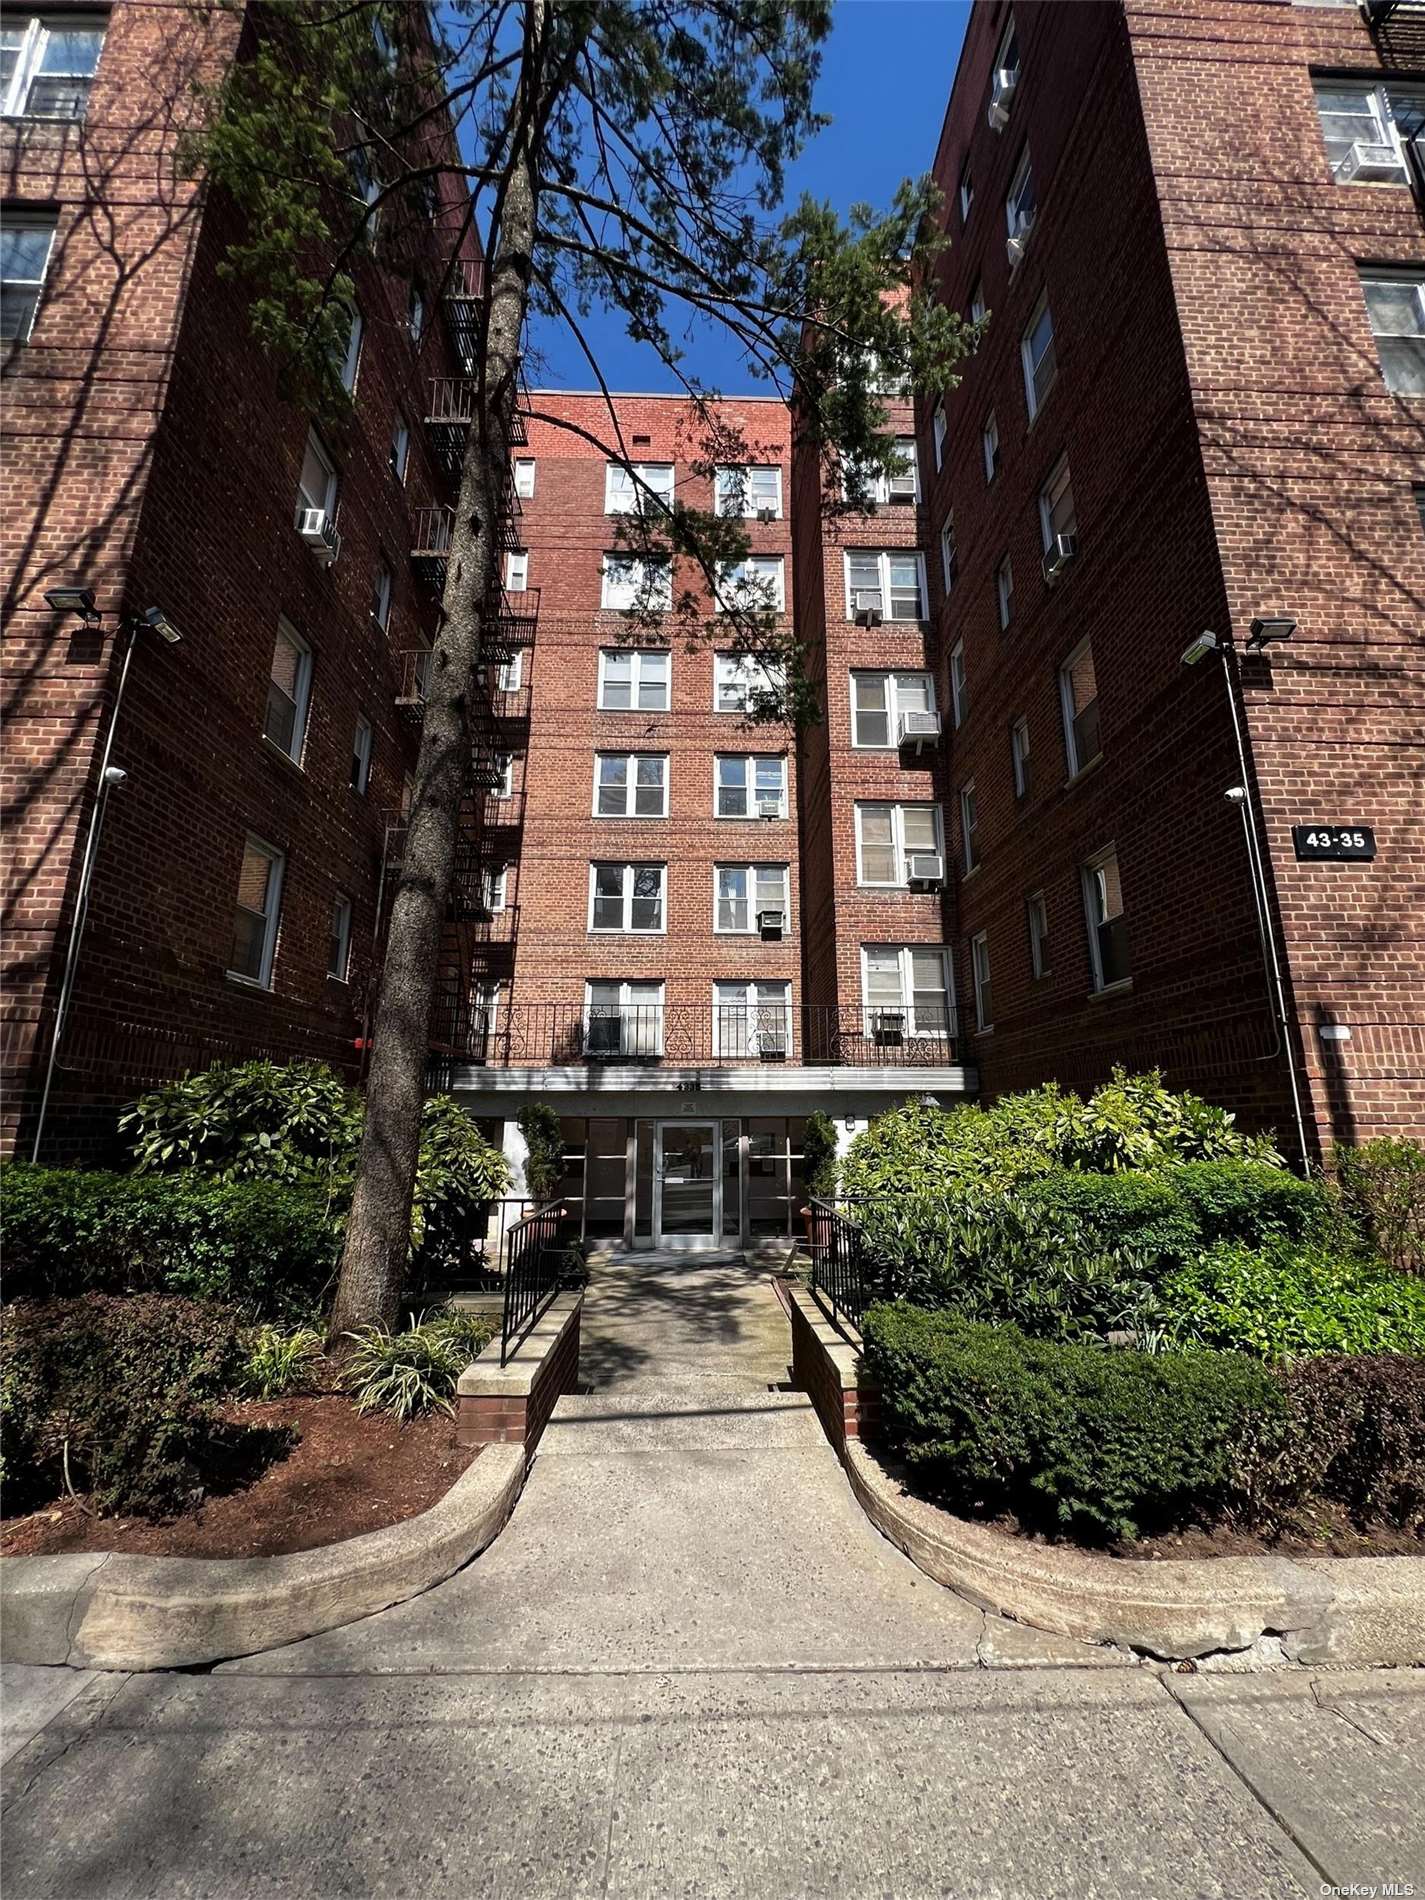 43-35 Union #3L, Flushing, NY 11355 - MLS# 3545744 - Coldwell Banker